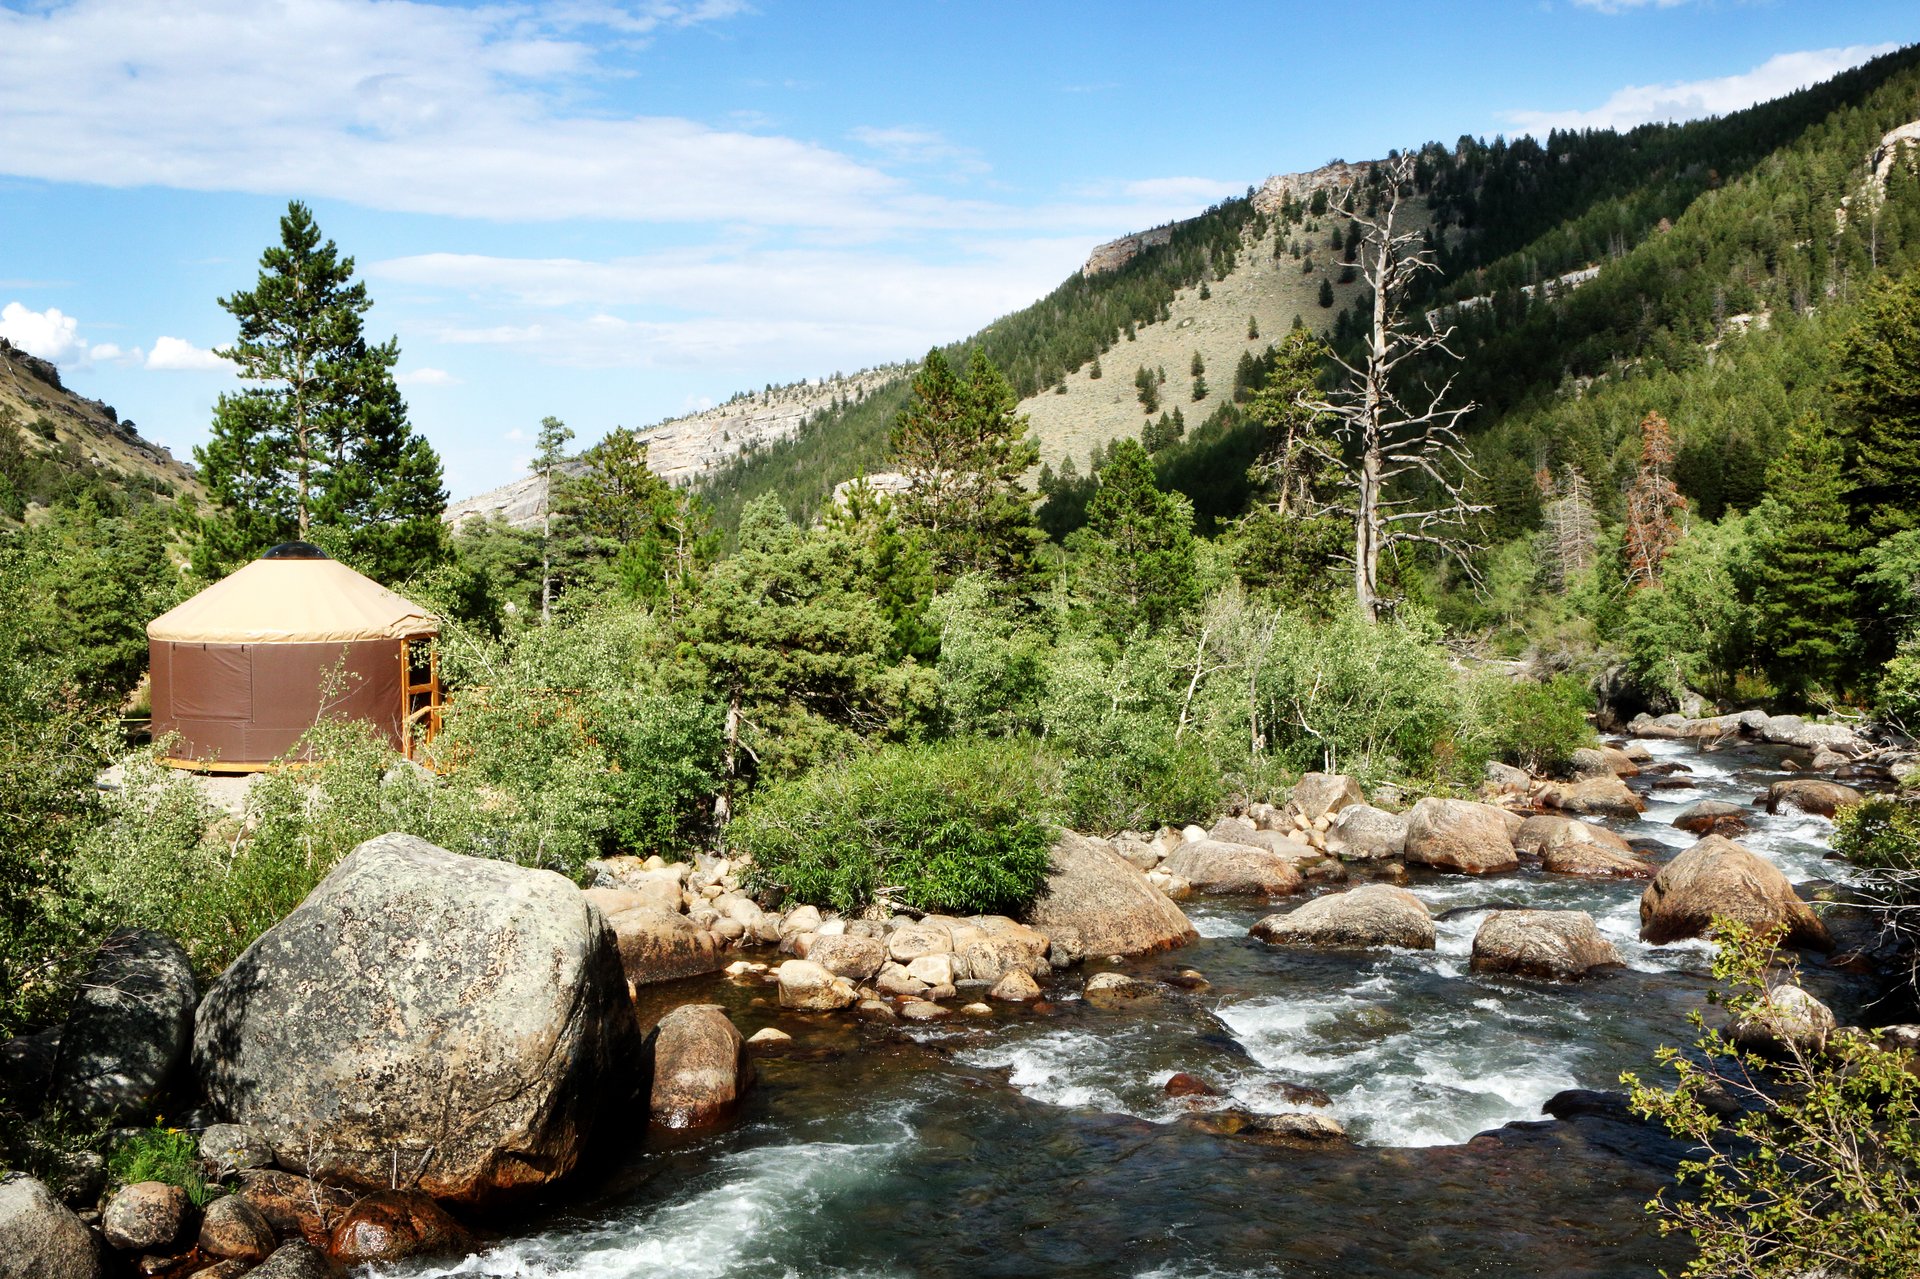 9 Next-Level Glamping Options on Public Lands